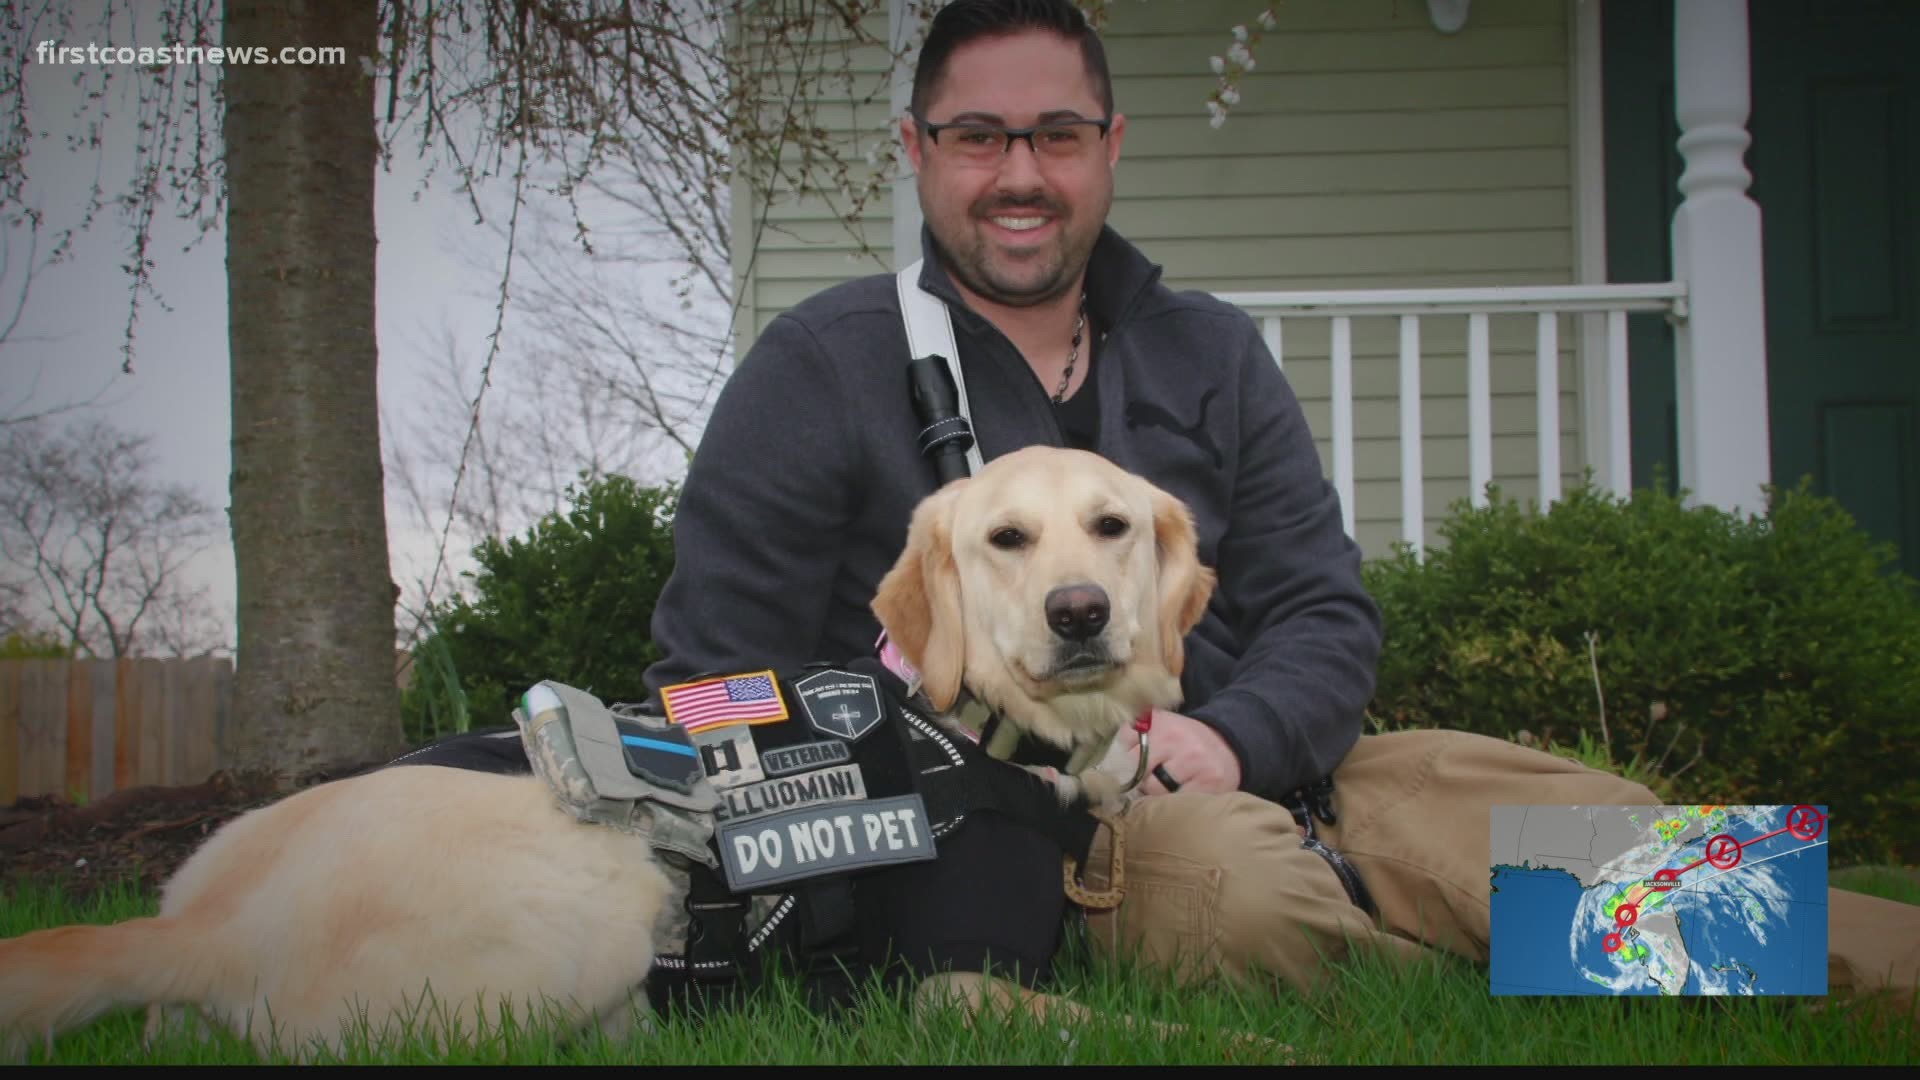 A local veteran is grateful for his companion and for the help he received from K9s for Warriors.